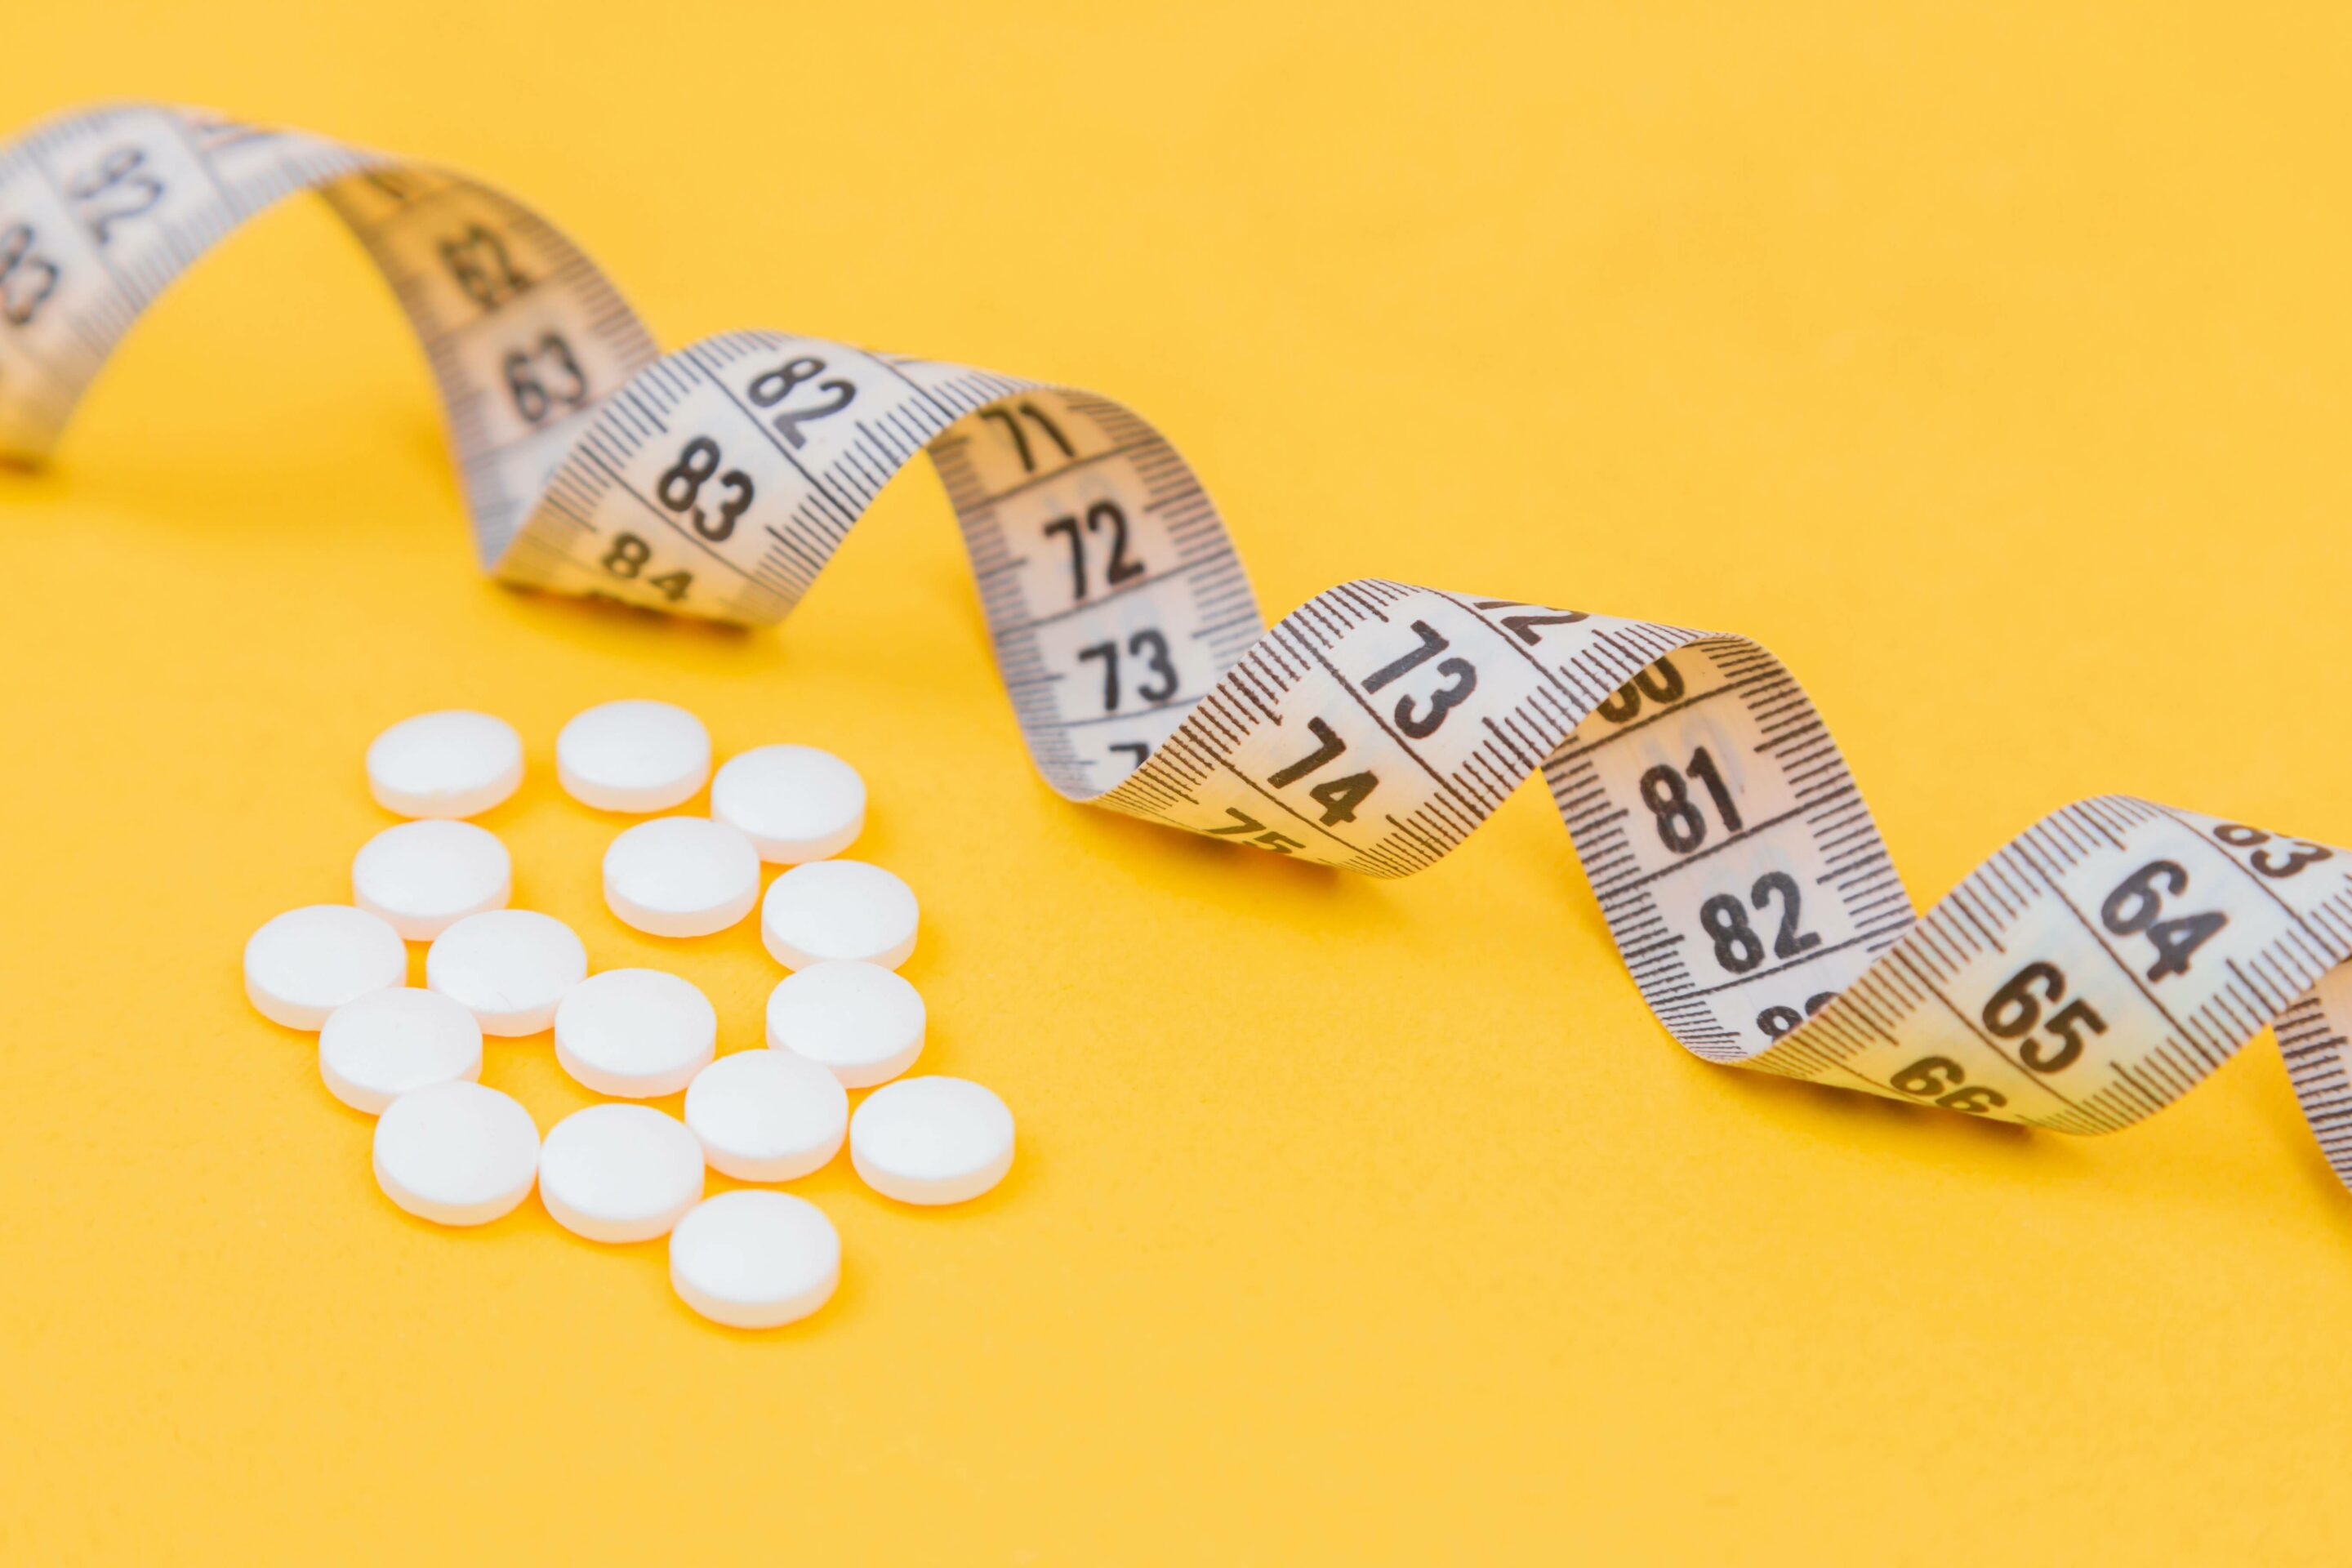 a measurement tape and weight loss drugs